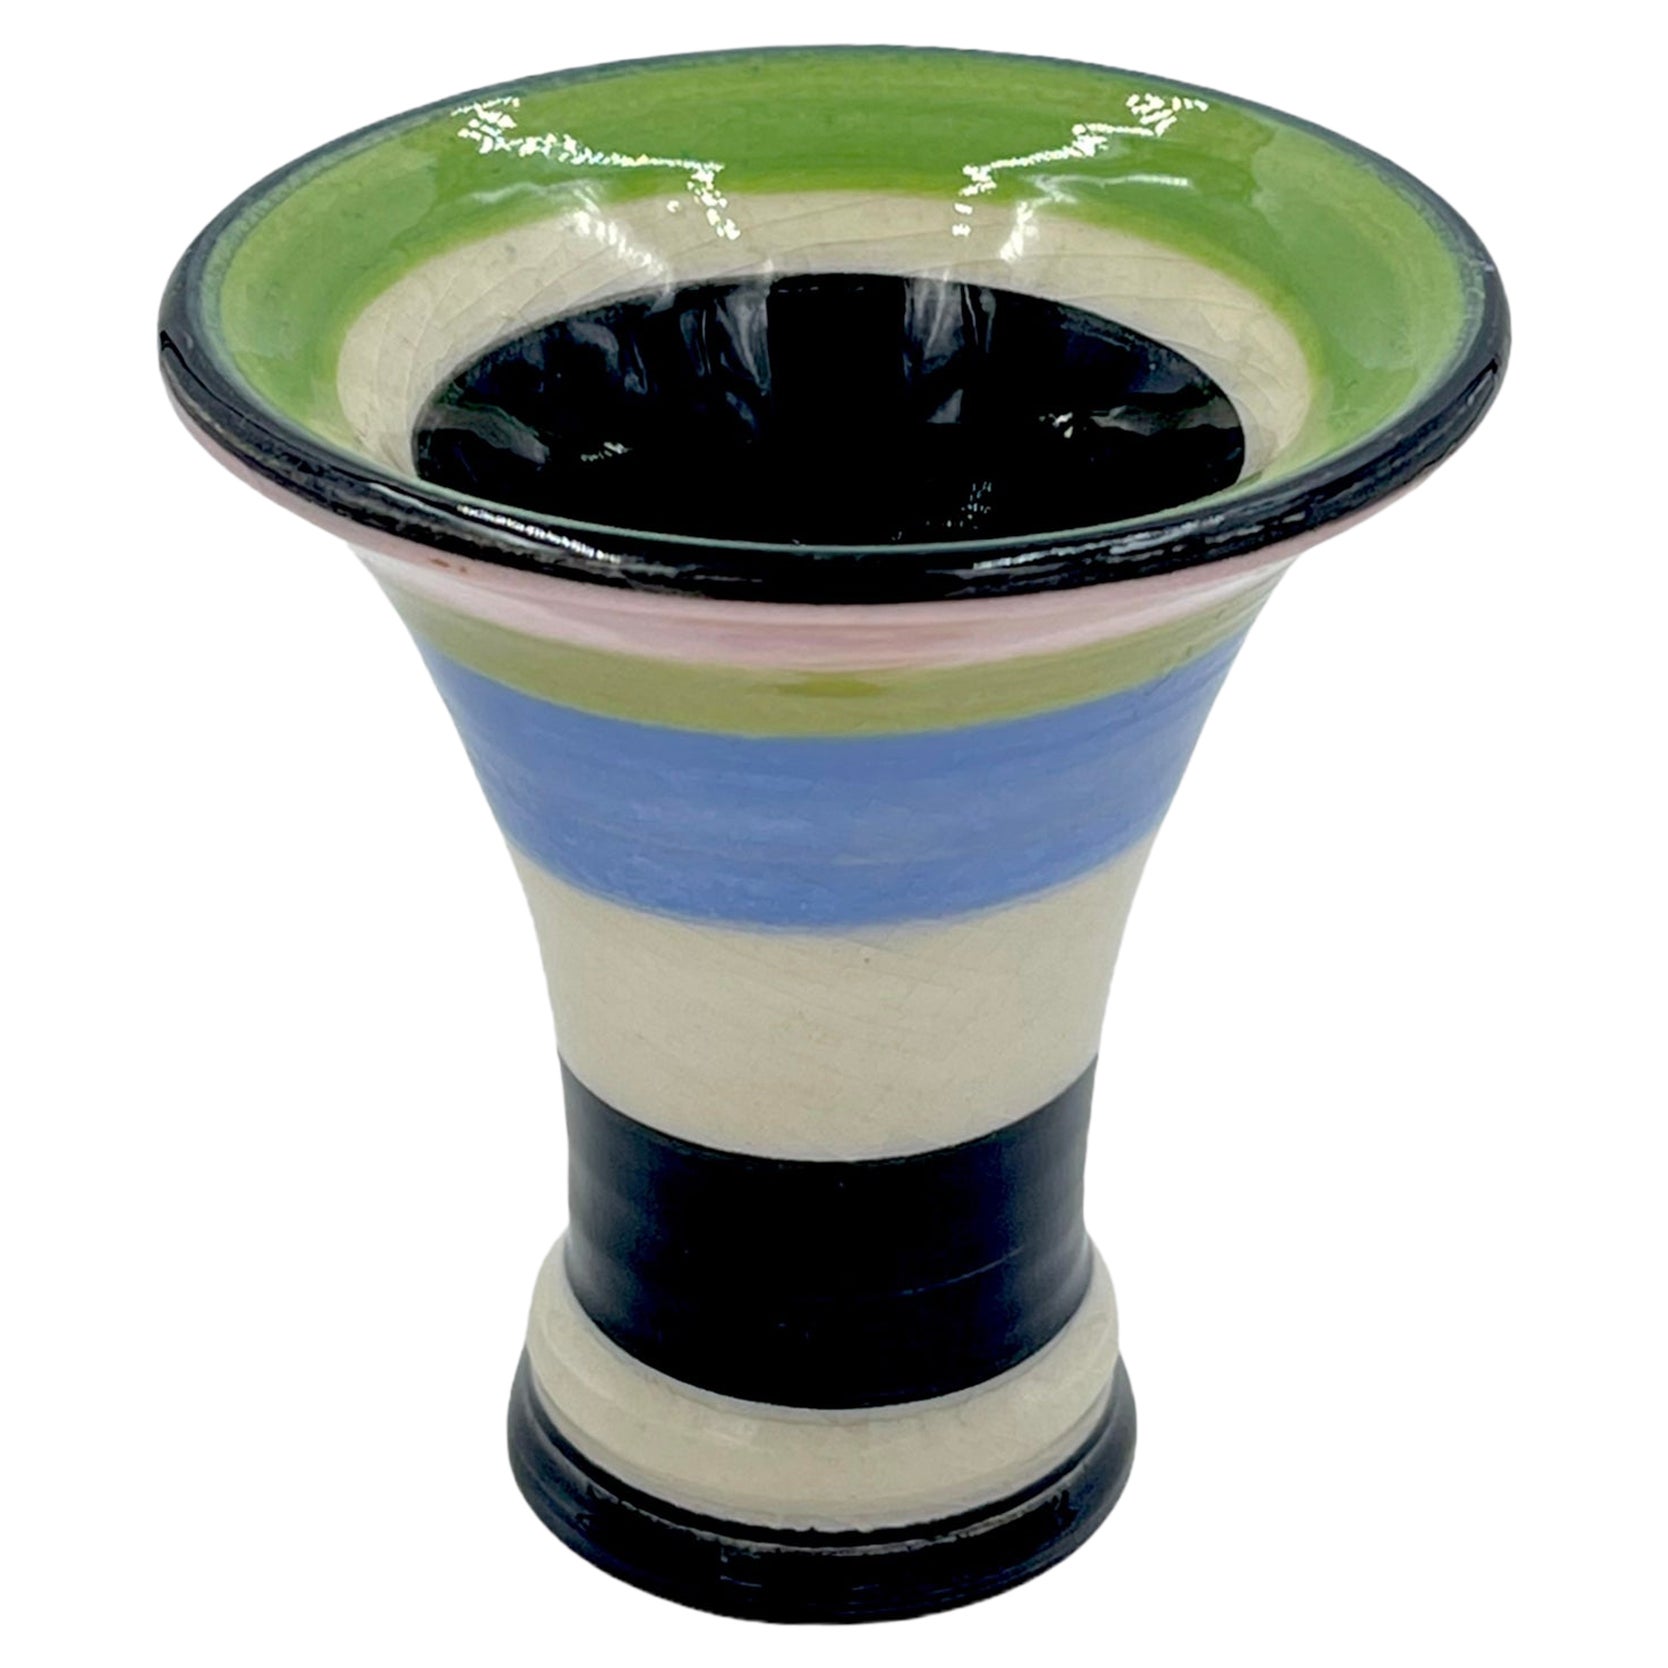 Peter Shire Expo Vase, 1998 For Sale